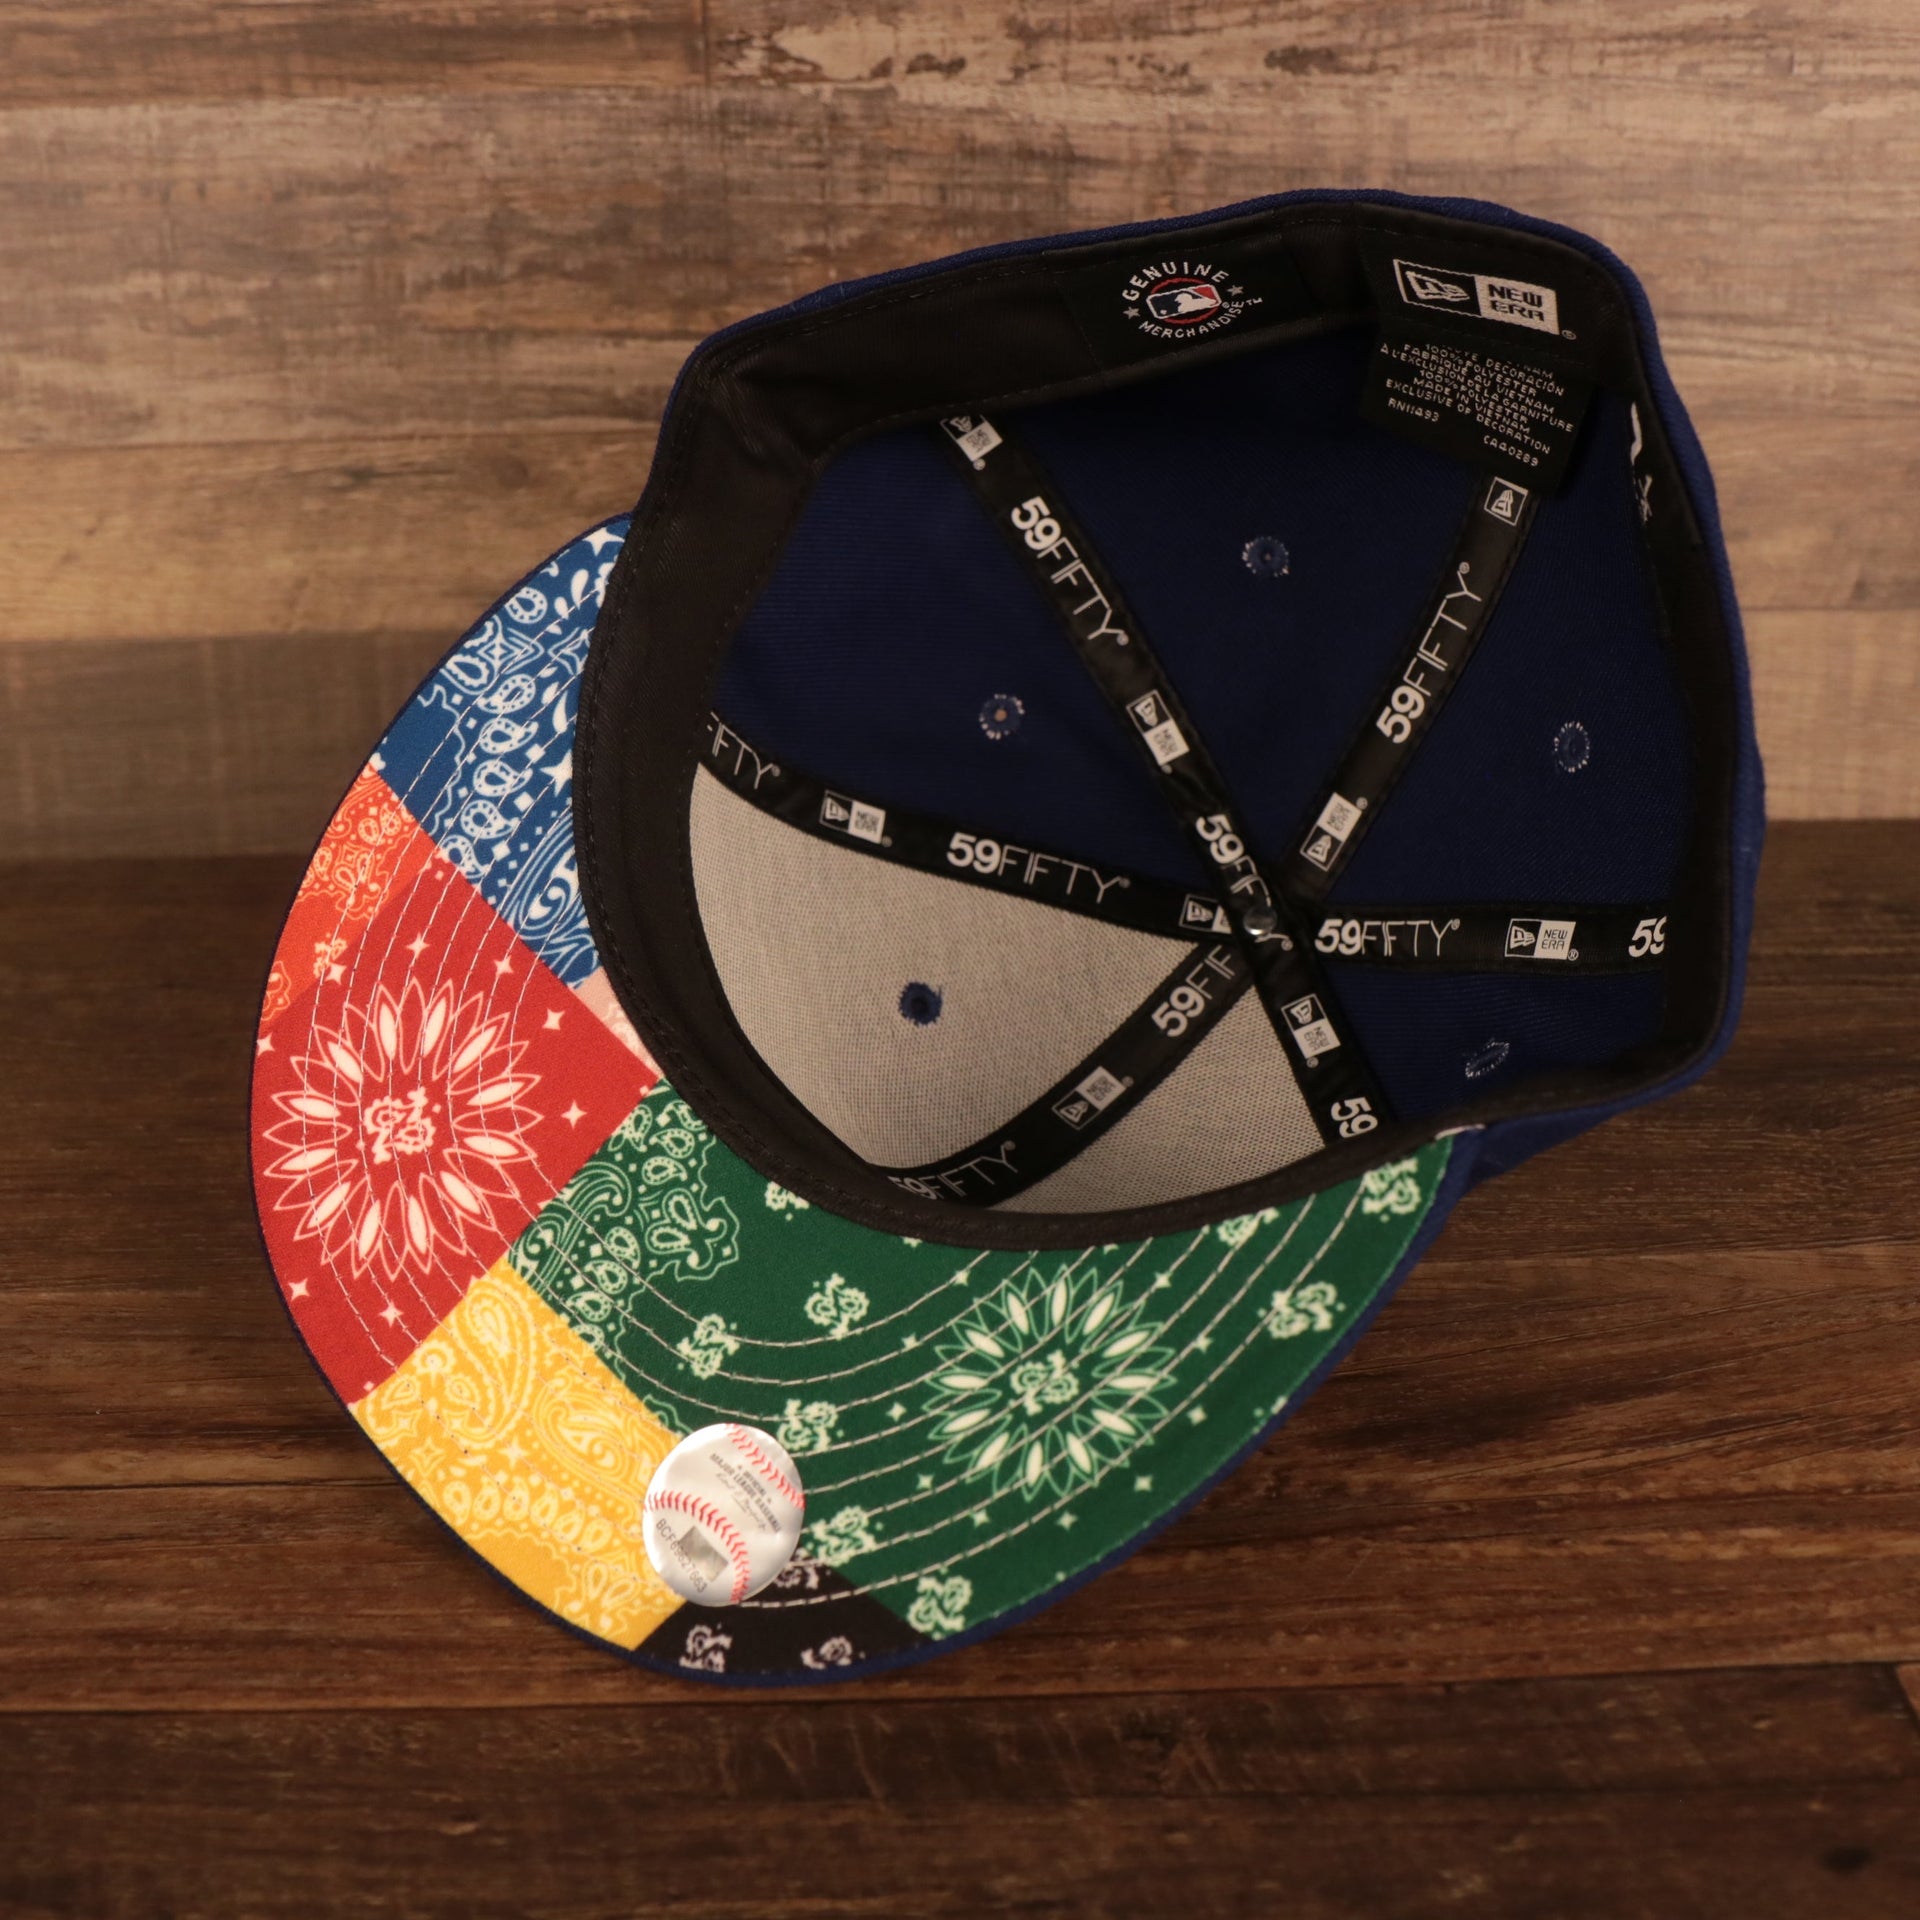 The black sweatband and black 59Fifty taping of the Los Angeles Dodger Multi-Color Paisley Bandana Under Brim 59Fifty Fitted Cap